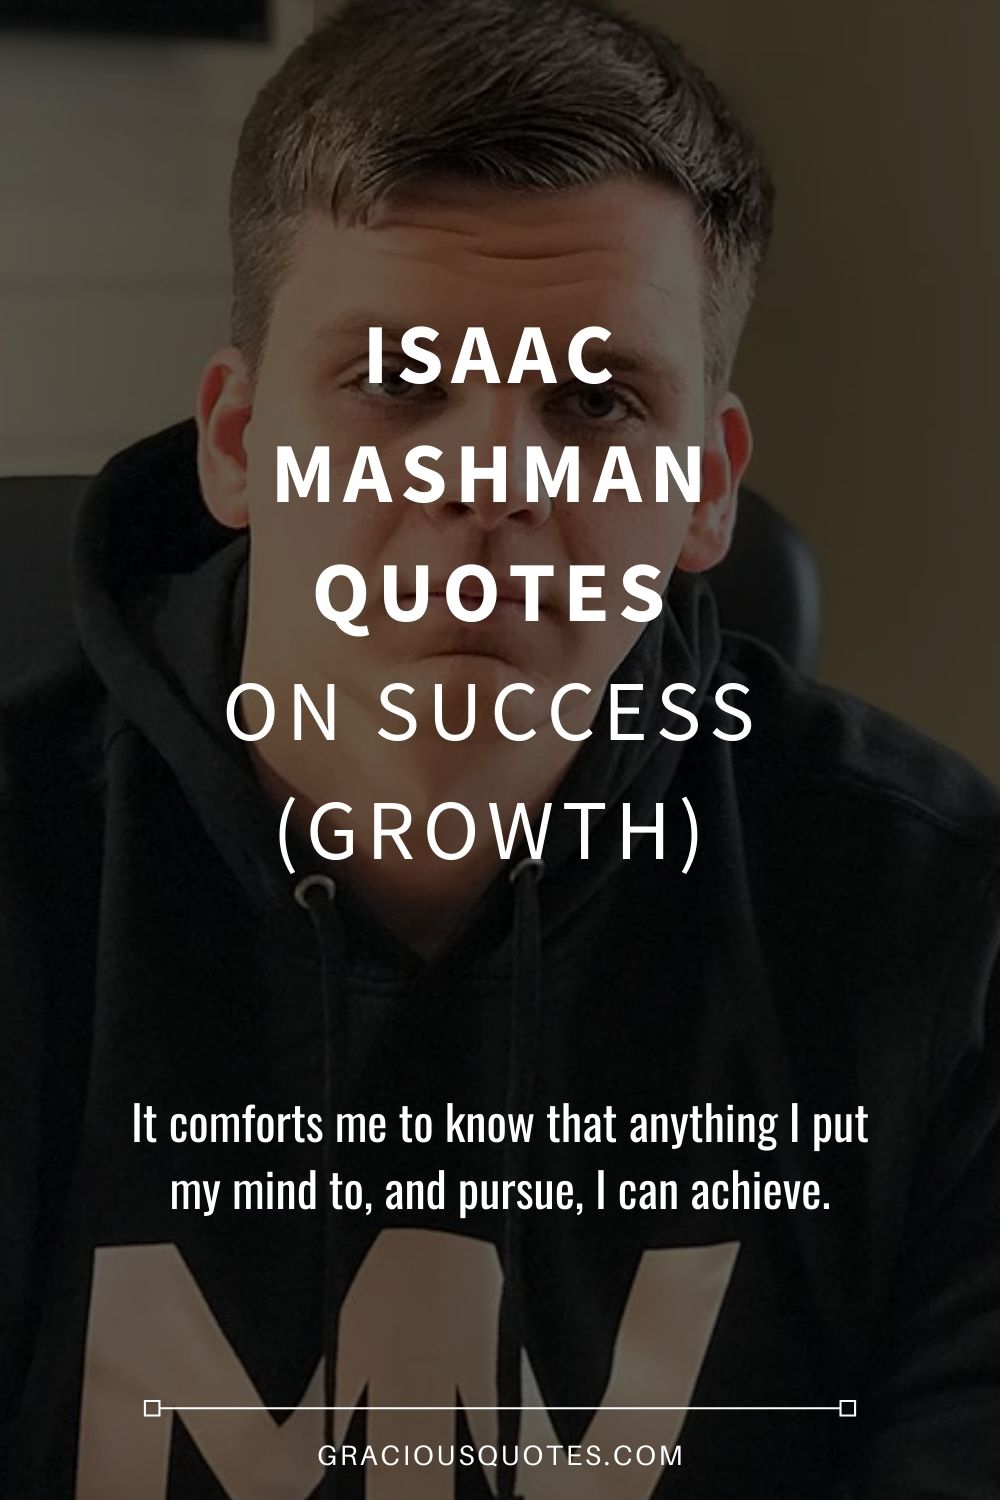 Isaac Mashman Quotes on Success (GROWTH) - Gracious Quotes